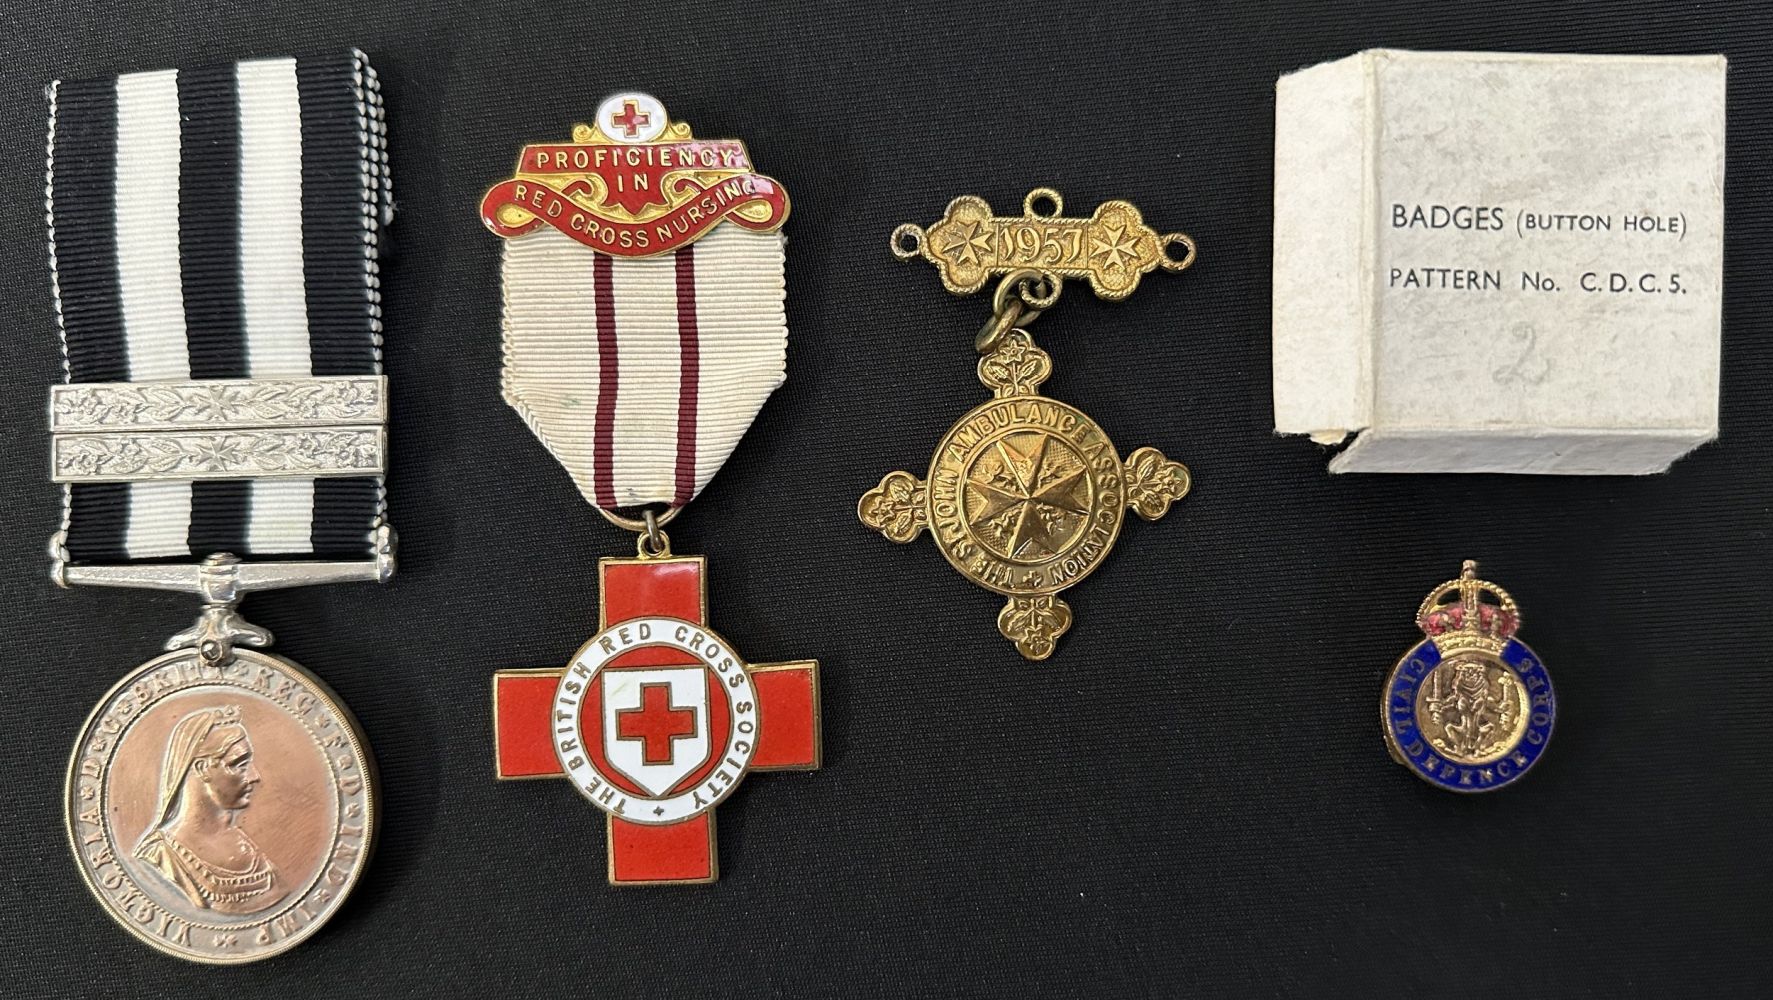 Service Medal of the Order of St John complete with ribbon, un-named: British Red Cross Medal to